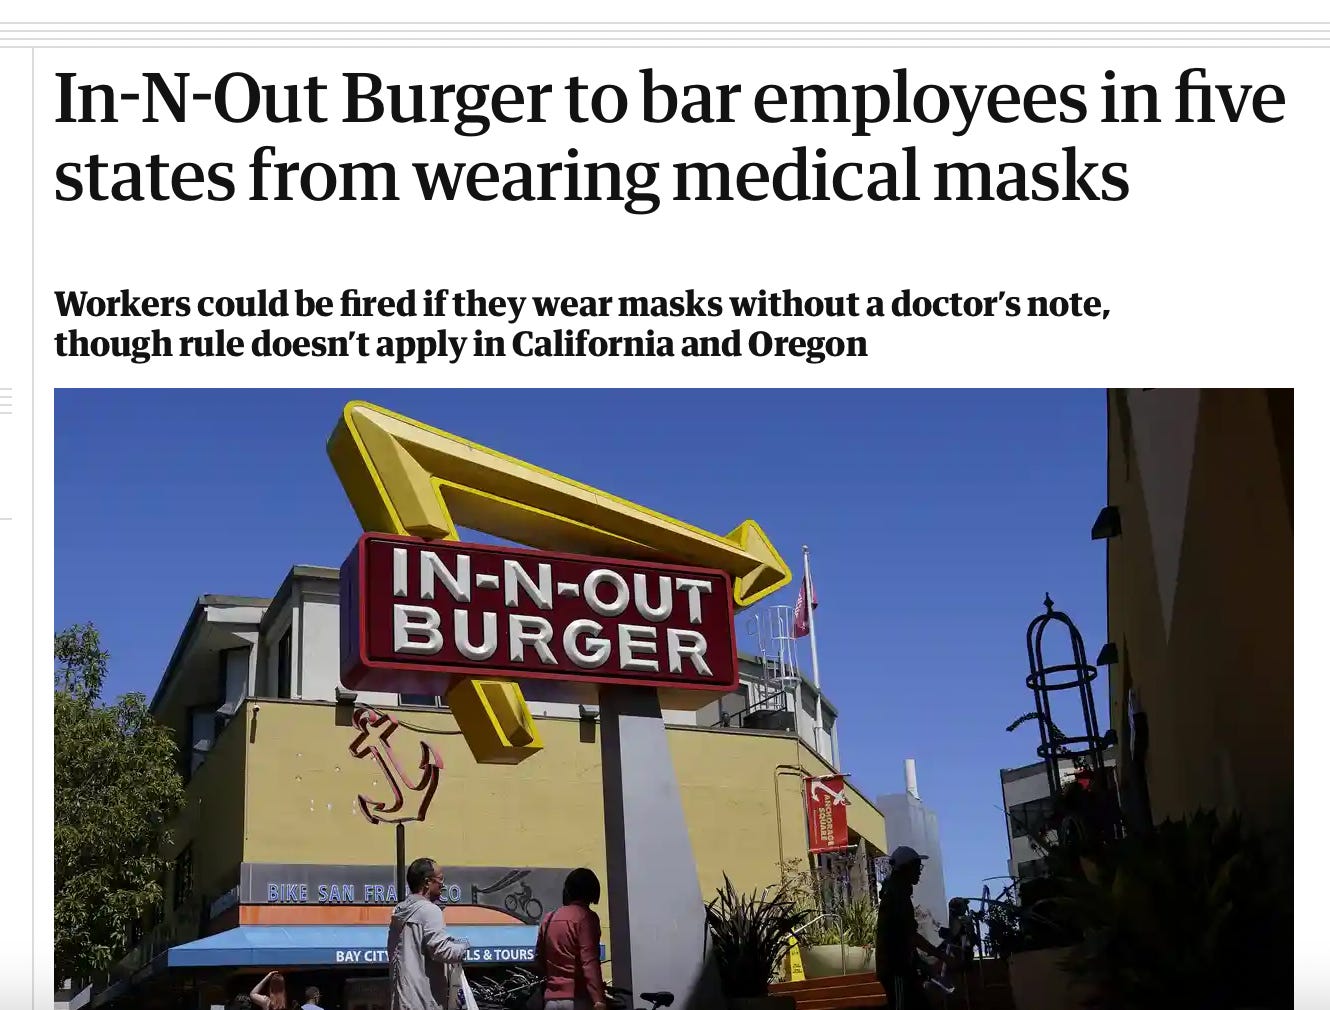 Headline" In-N-Out Burger to bar employees in five states from wearing medical masks. Workers could be fired if they wear masks without a doctor's note though rule doesn't apply in California and Oregon.